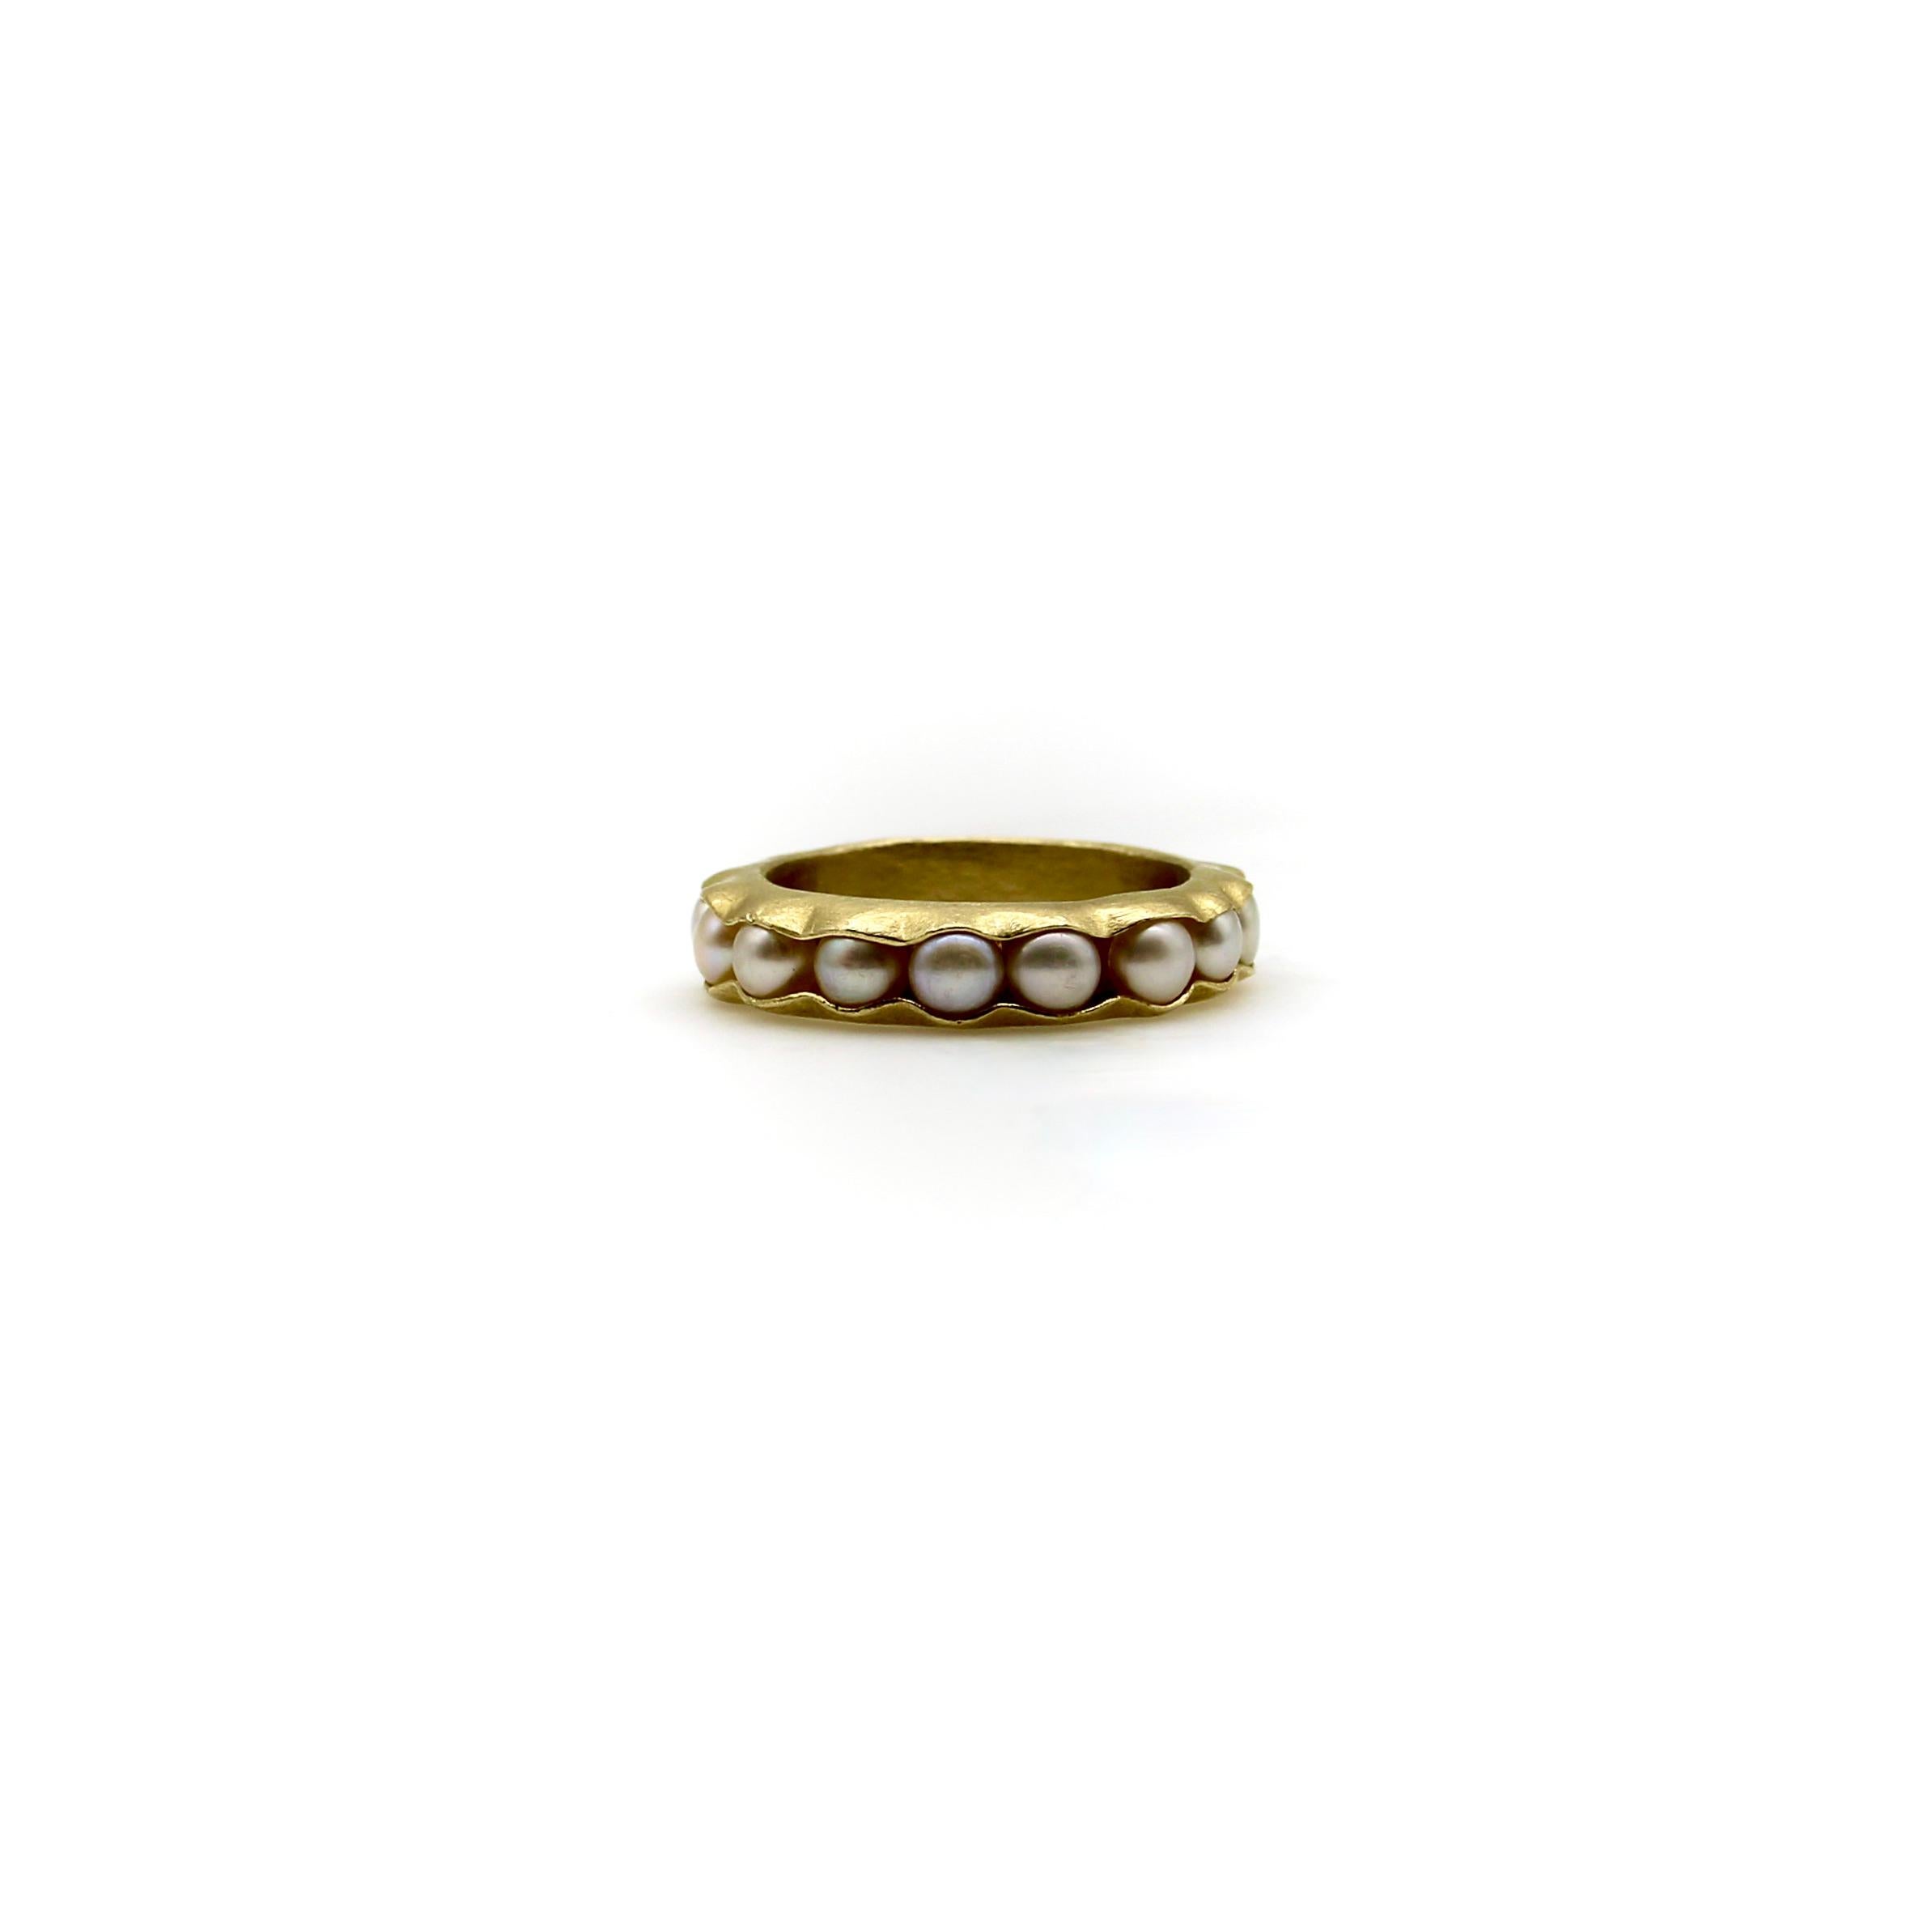 This pearl eternity band is beautifully crafted with 16 cultured 4 mm pearls. The detail we like most is the pea pod setting where the gold folds around the pearls like milky white peas in a pod. The surface of the gold is brushed to add a nice